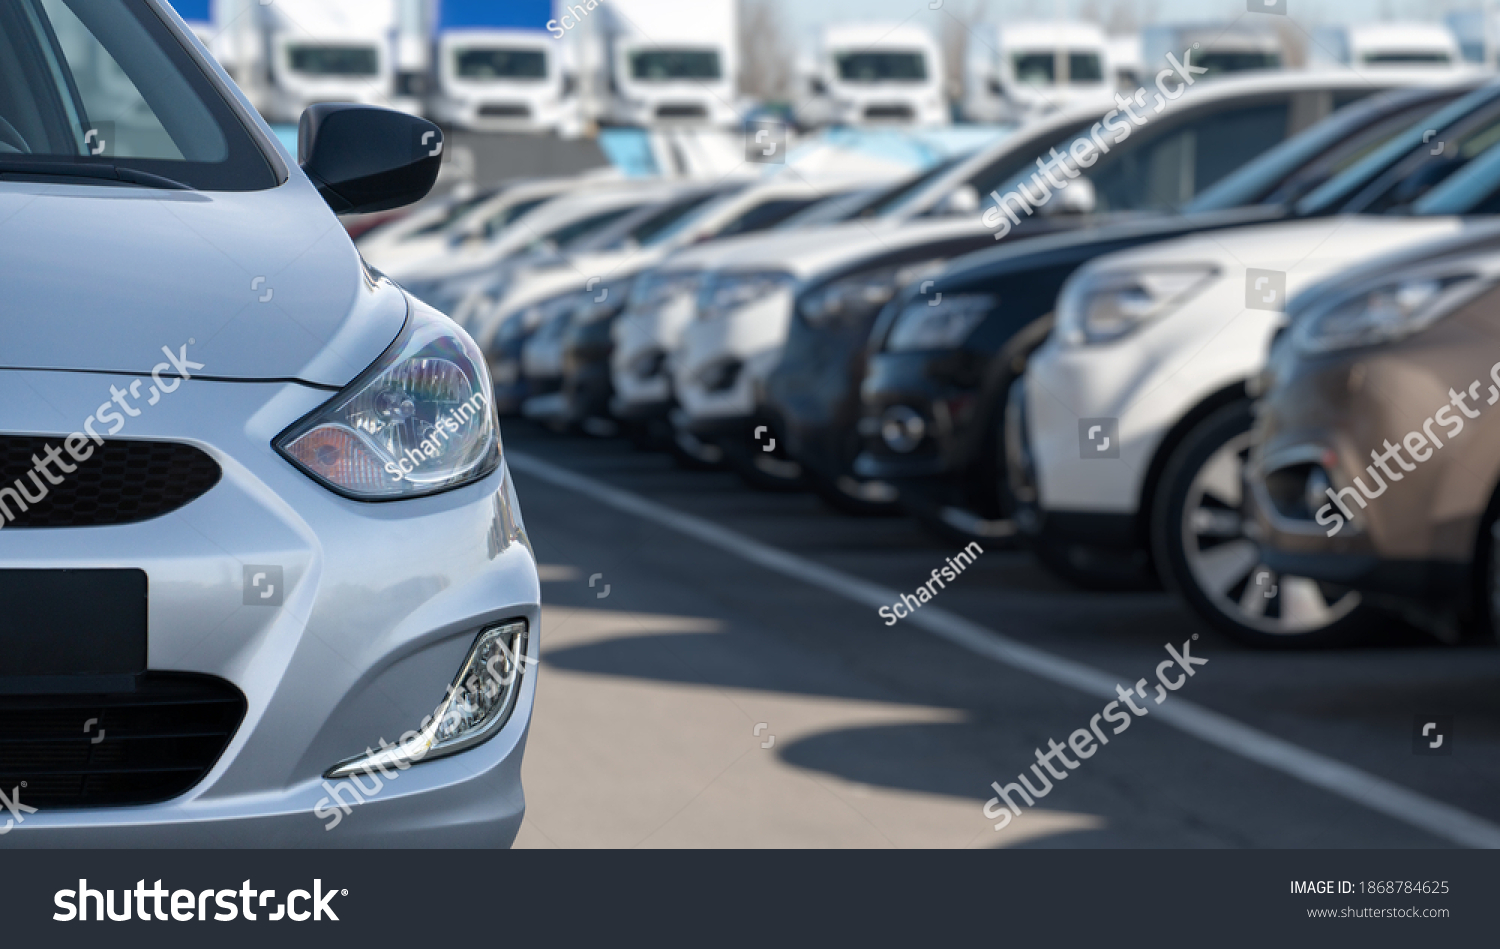 Cars in a rows. Used car sales #1868784625